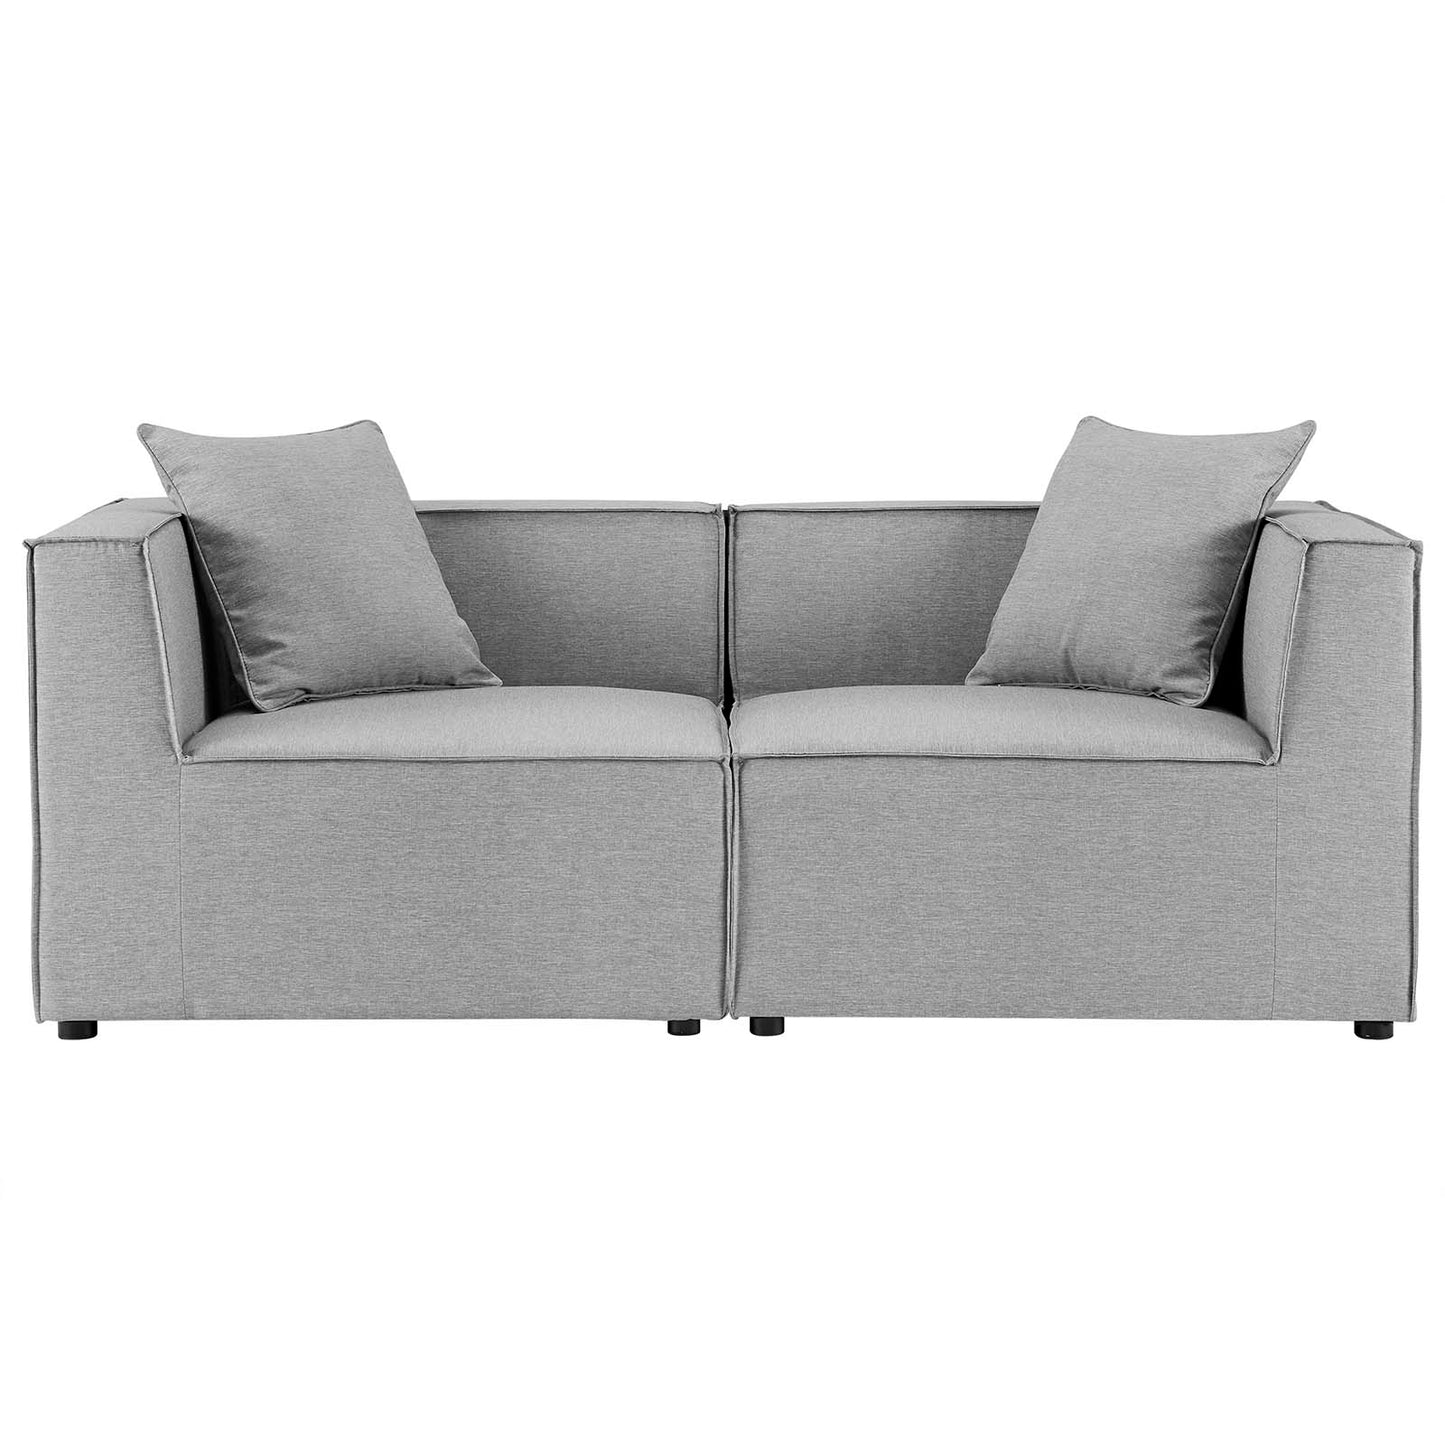 Saybrook Outdoor Patio Upholstered 2-Piece Sectional Sofa Loveseat Gray EEI-4377-GRY